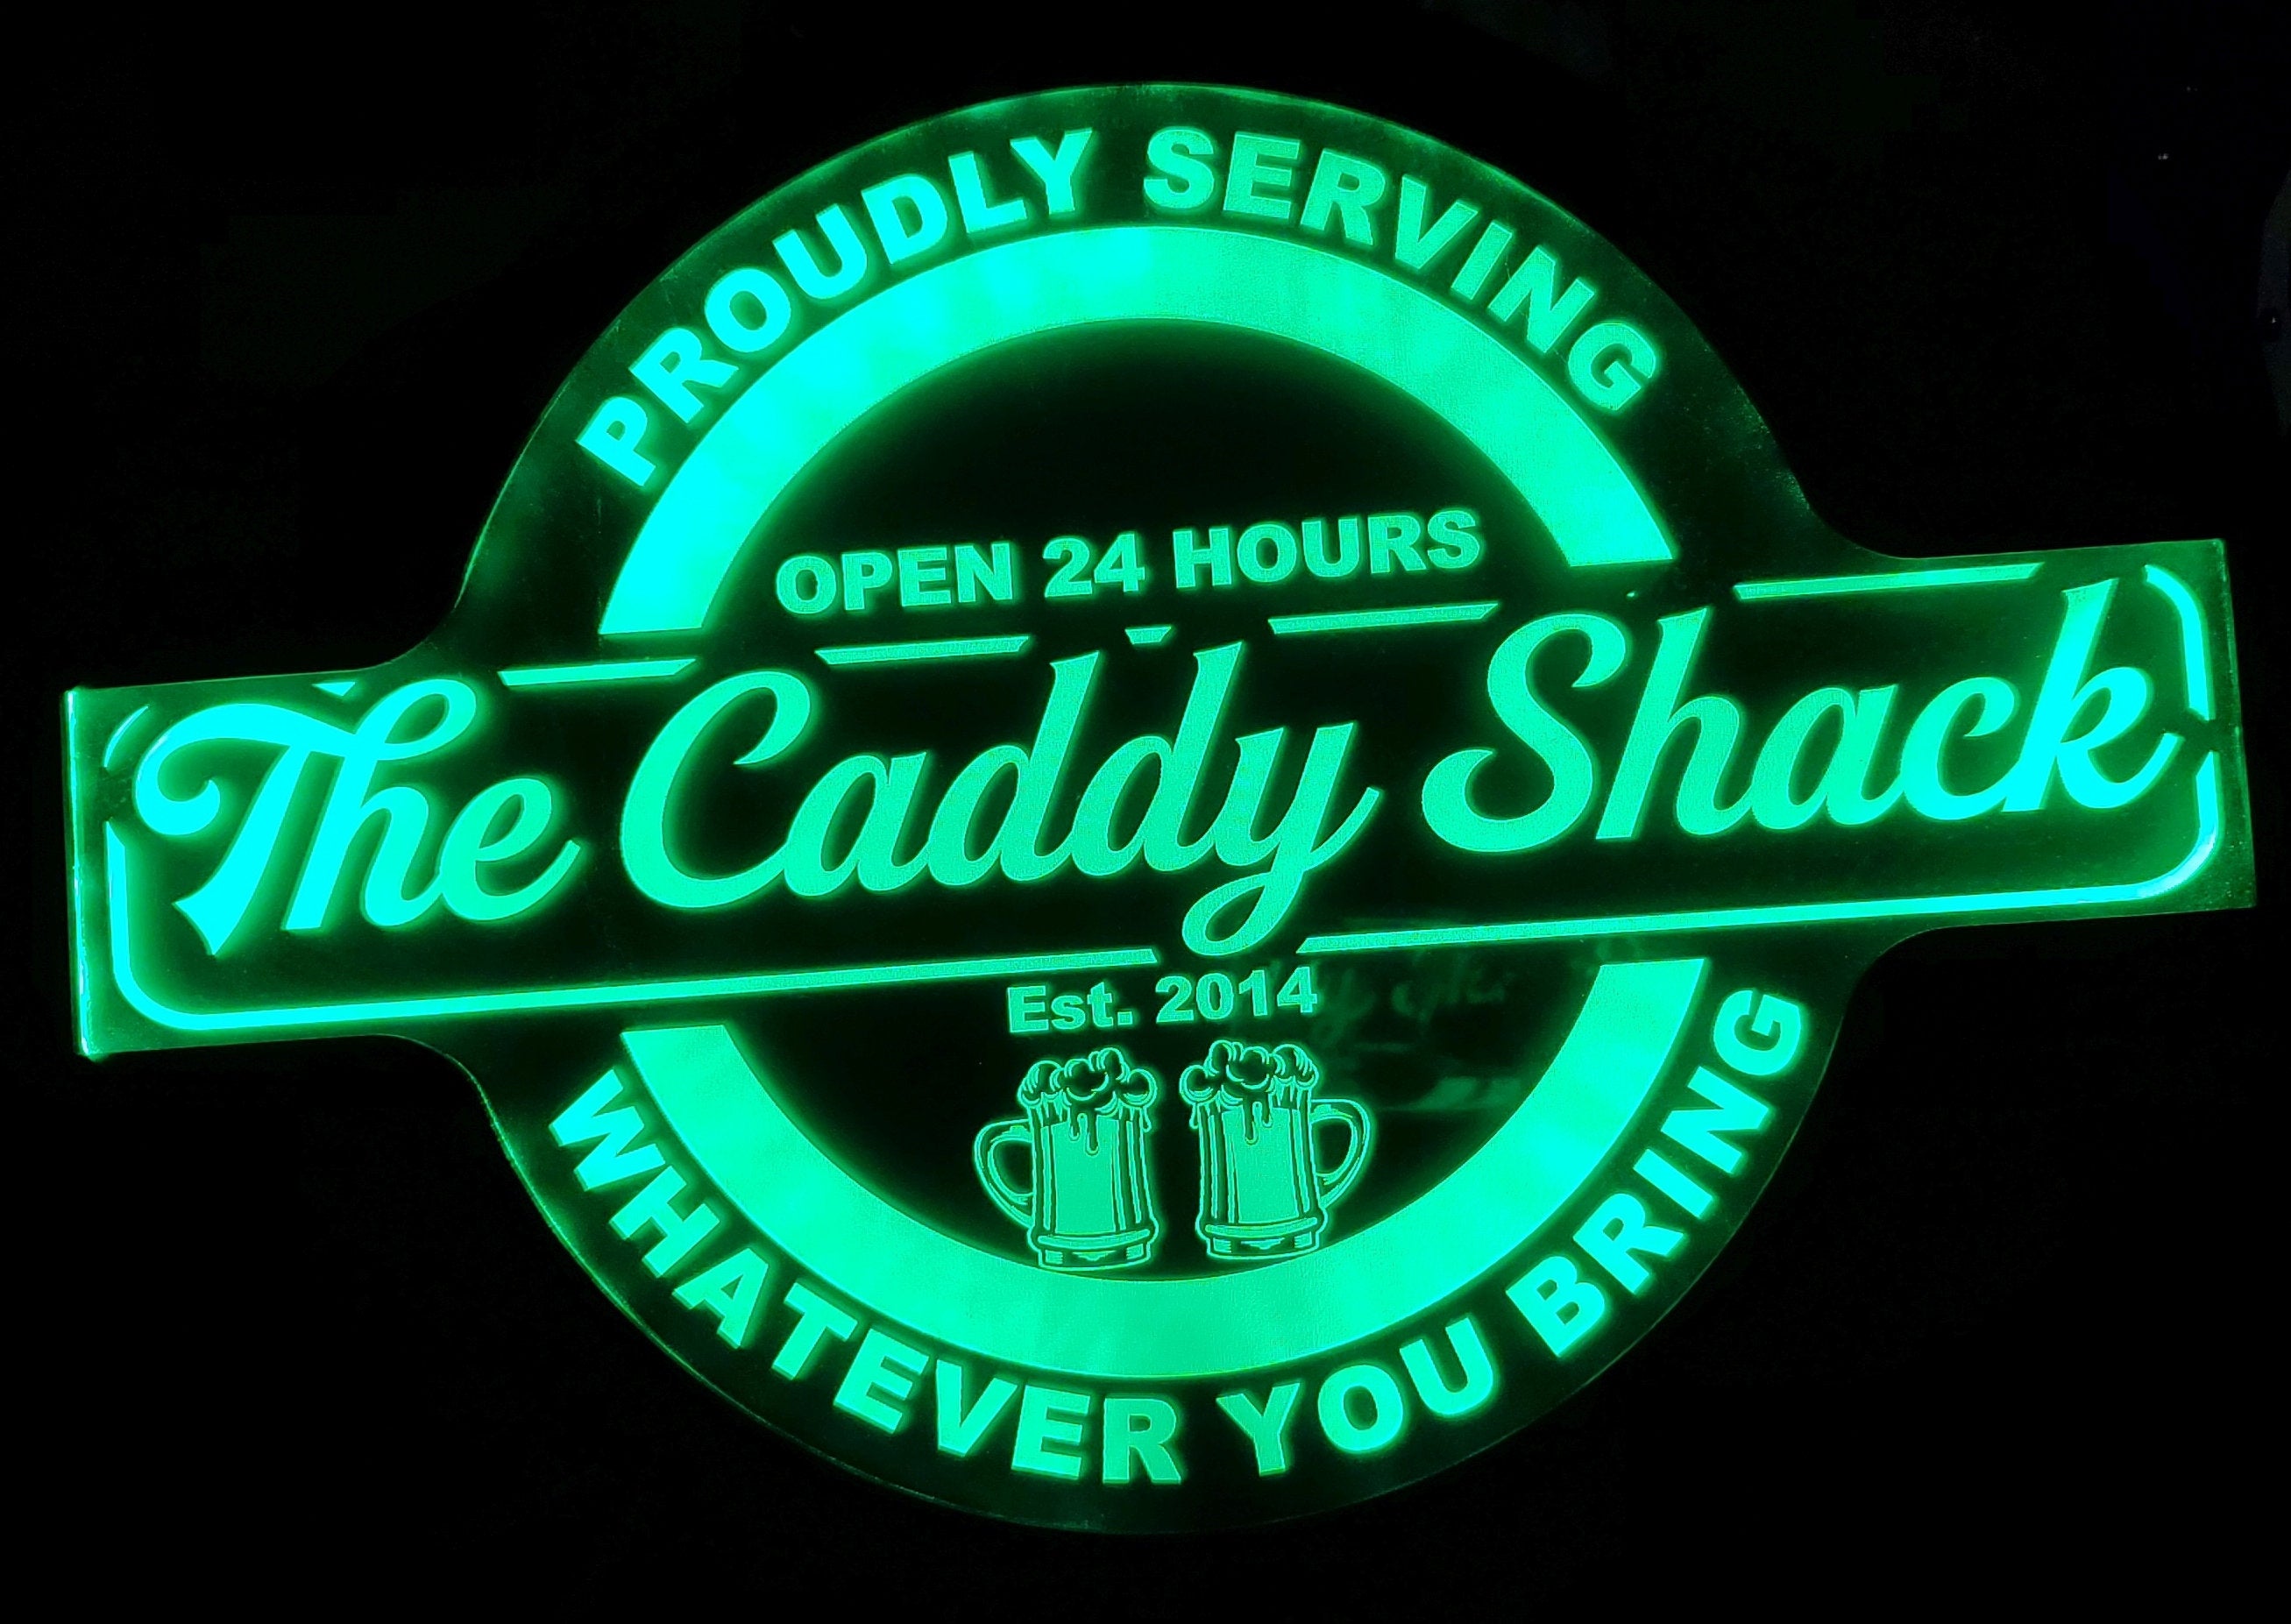 Custom Sign Bar, Pool, Barn, Garden, Shed, Gazebo or Shack Led Wall Sign Neon Like - Color Changing Remote Control - 4 Sizes - Free Shipping